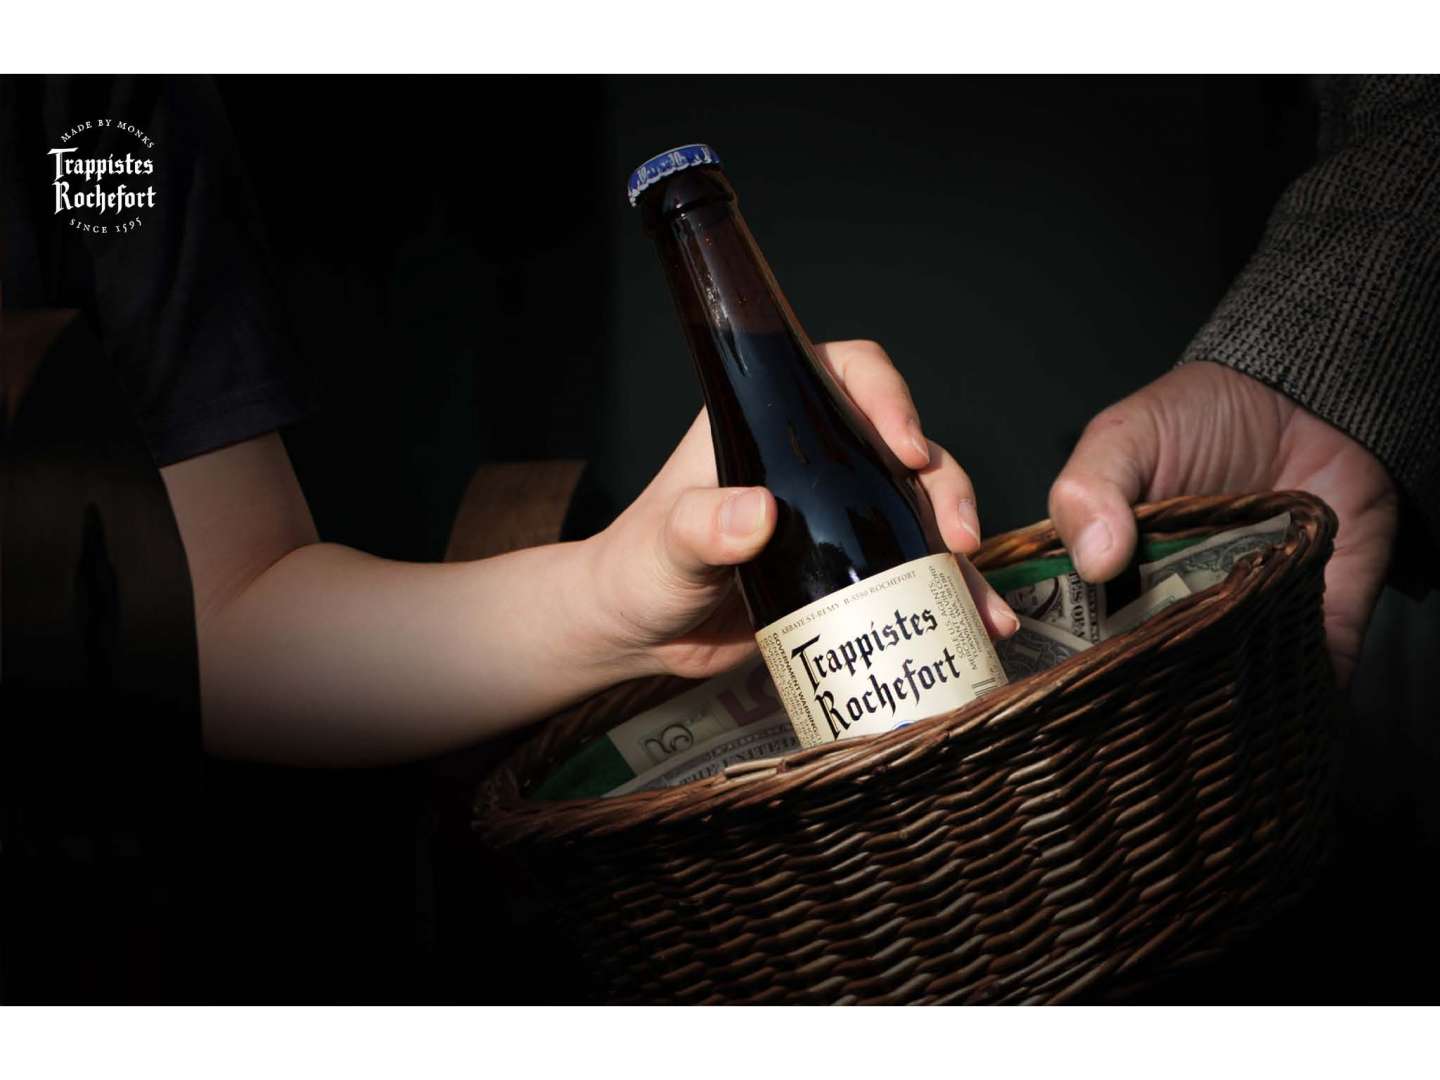 Trappistes Rochefort Beer